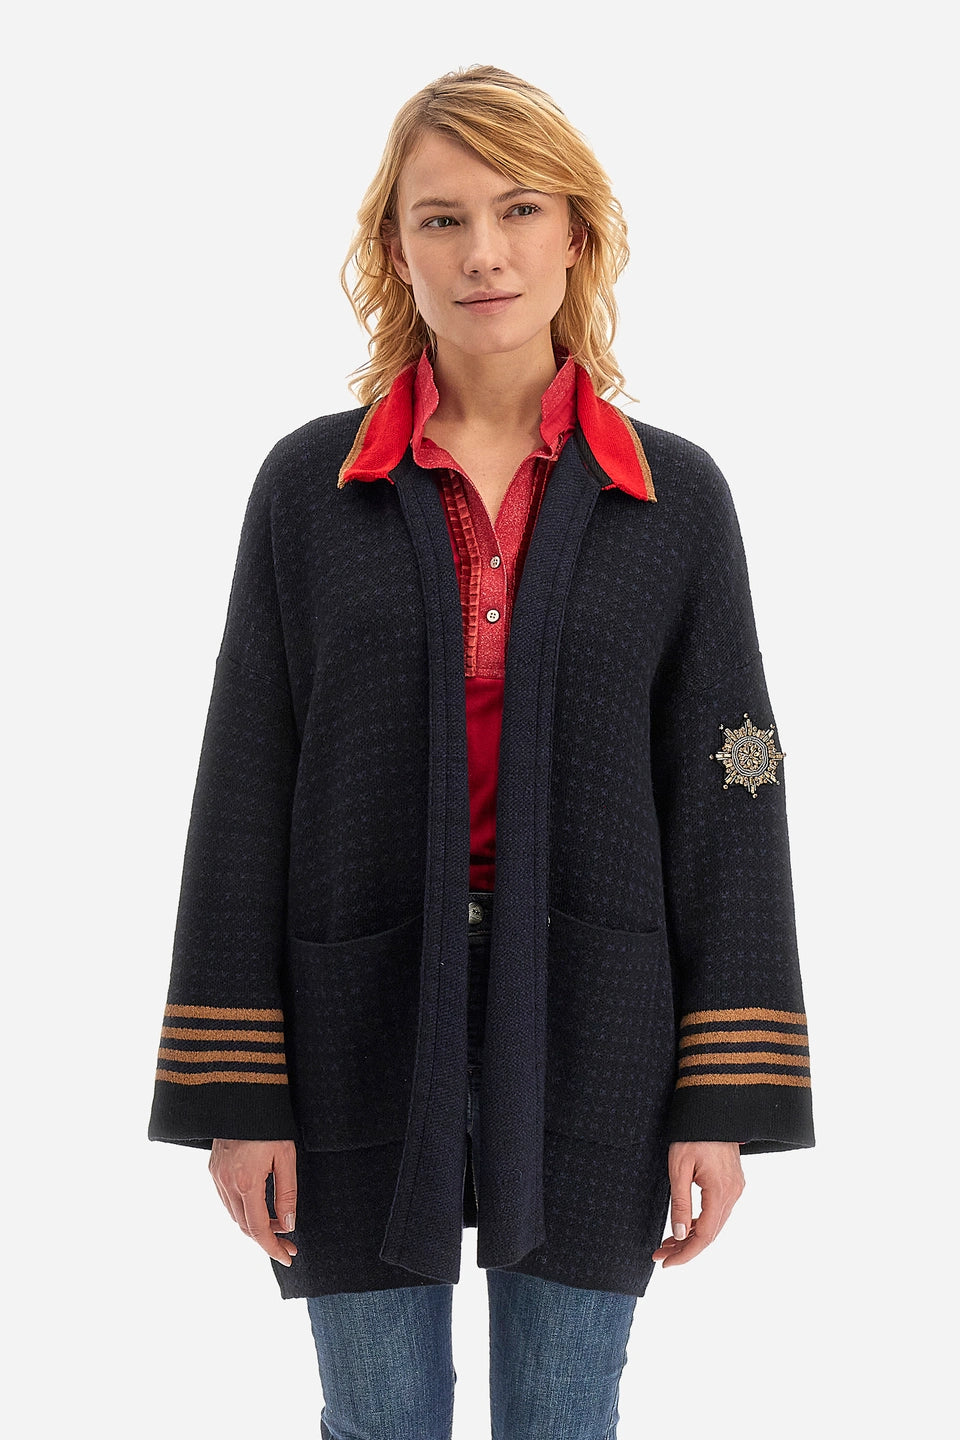 La Martina Knitted Cardigan in Soft Wool Blend - Wendall | Navy